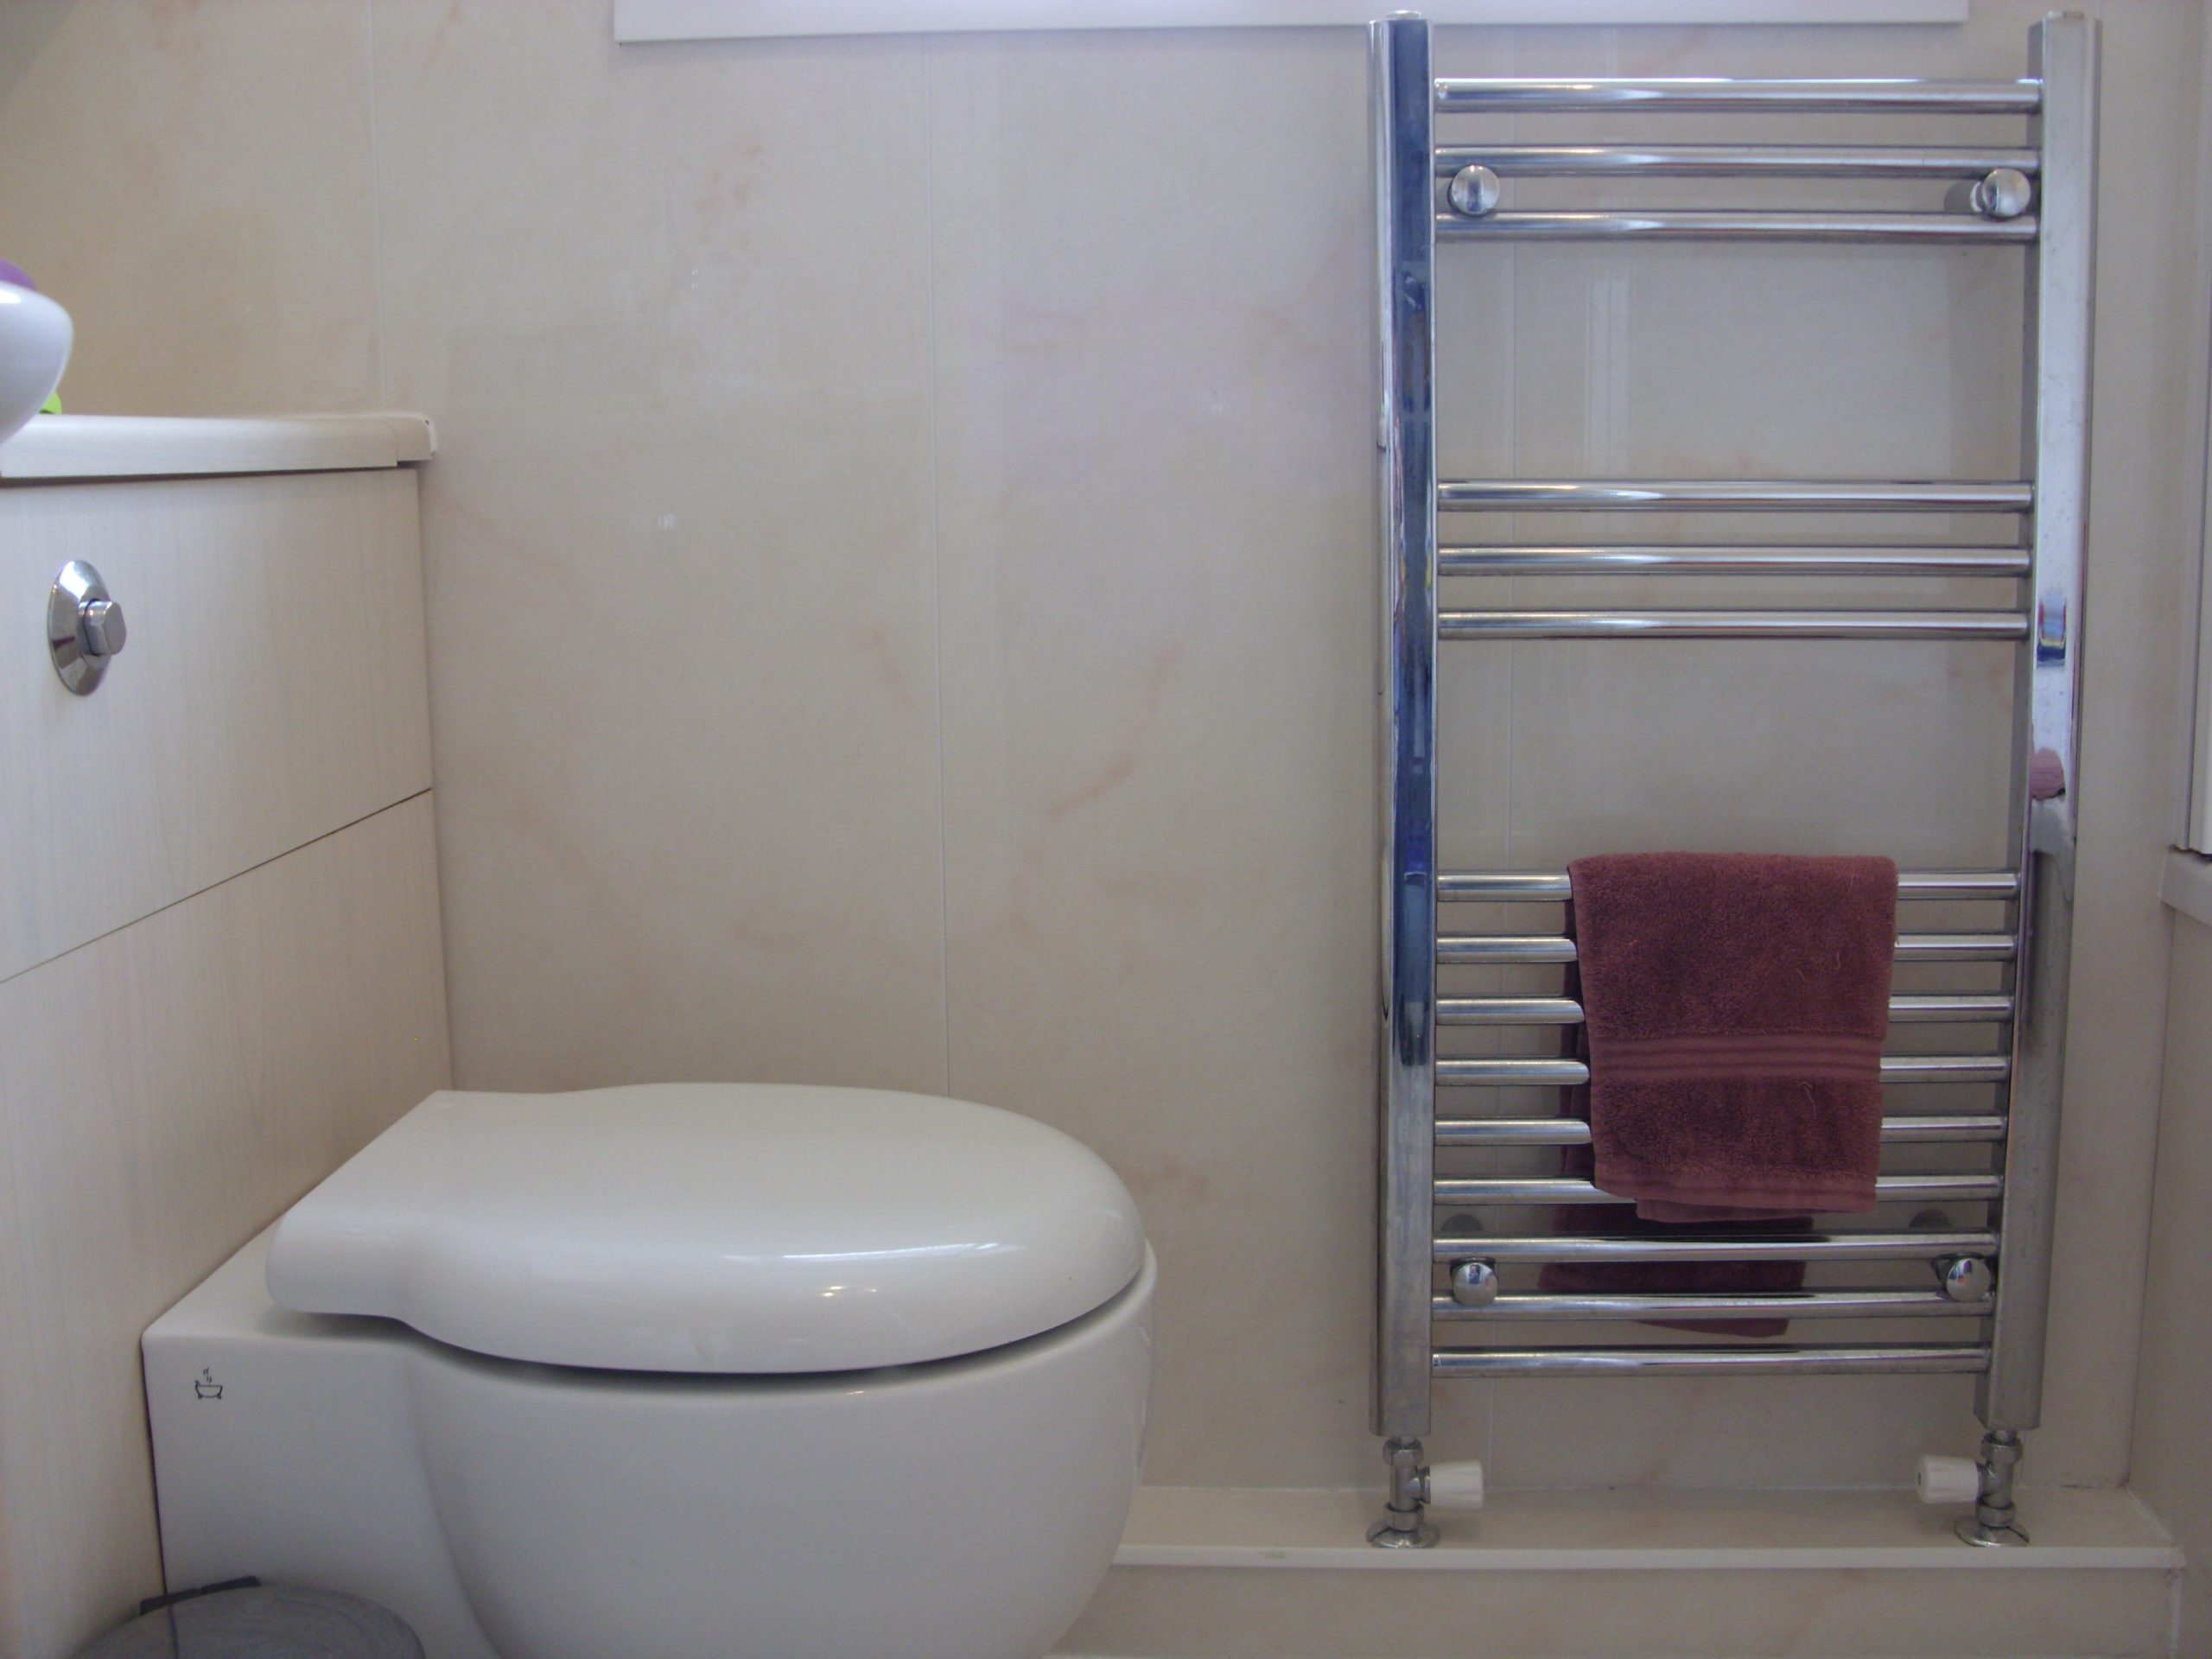 piankmarble2 scaled - Bathroom Design - Working With Soil Pipes